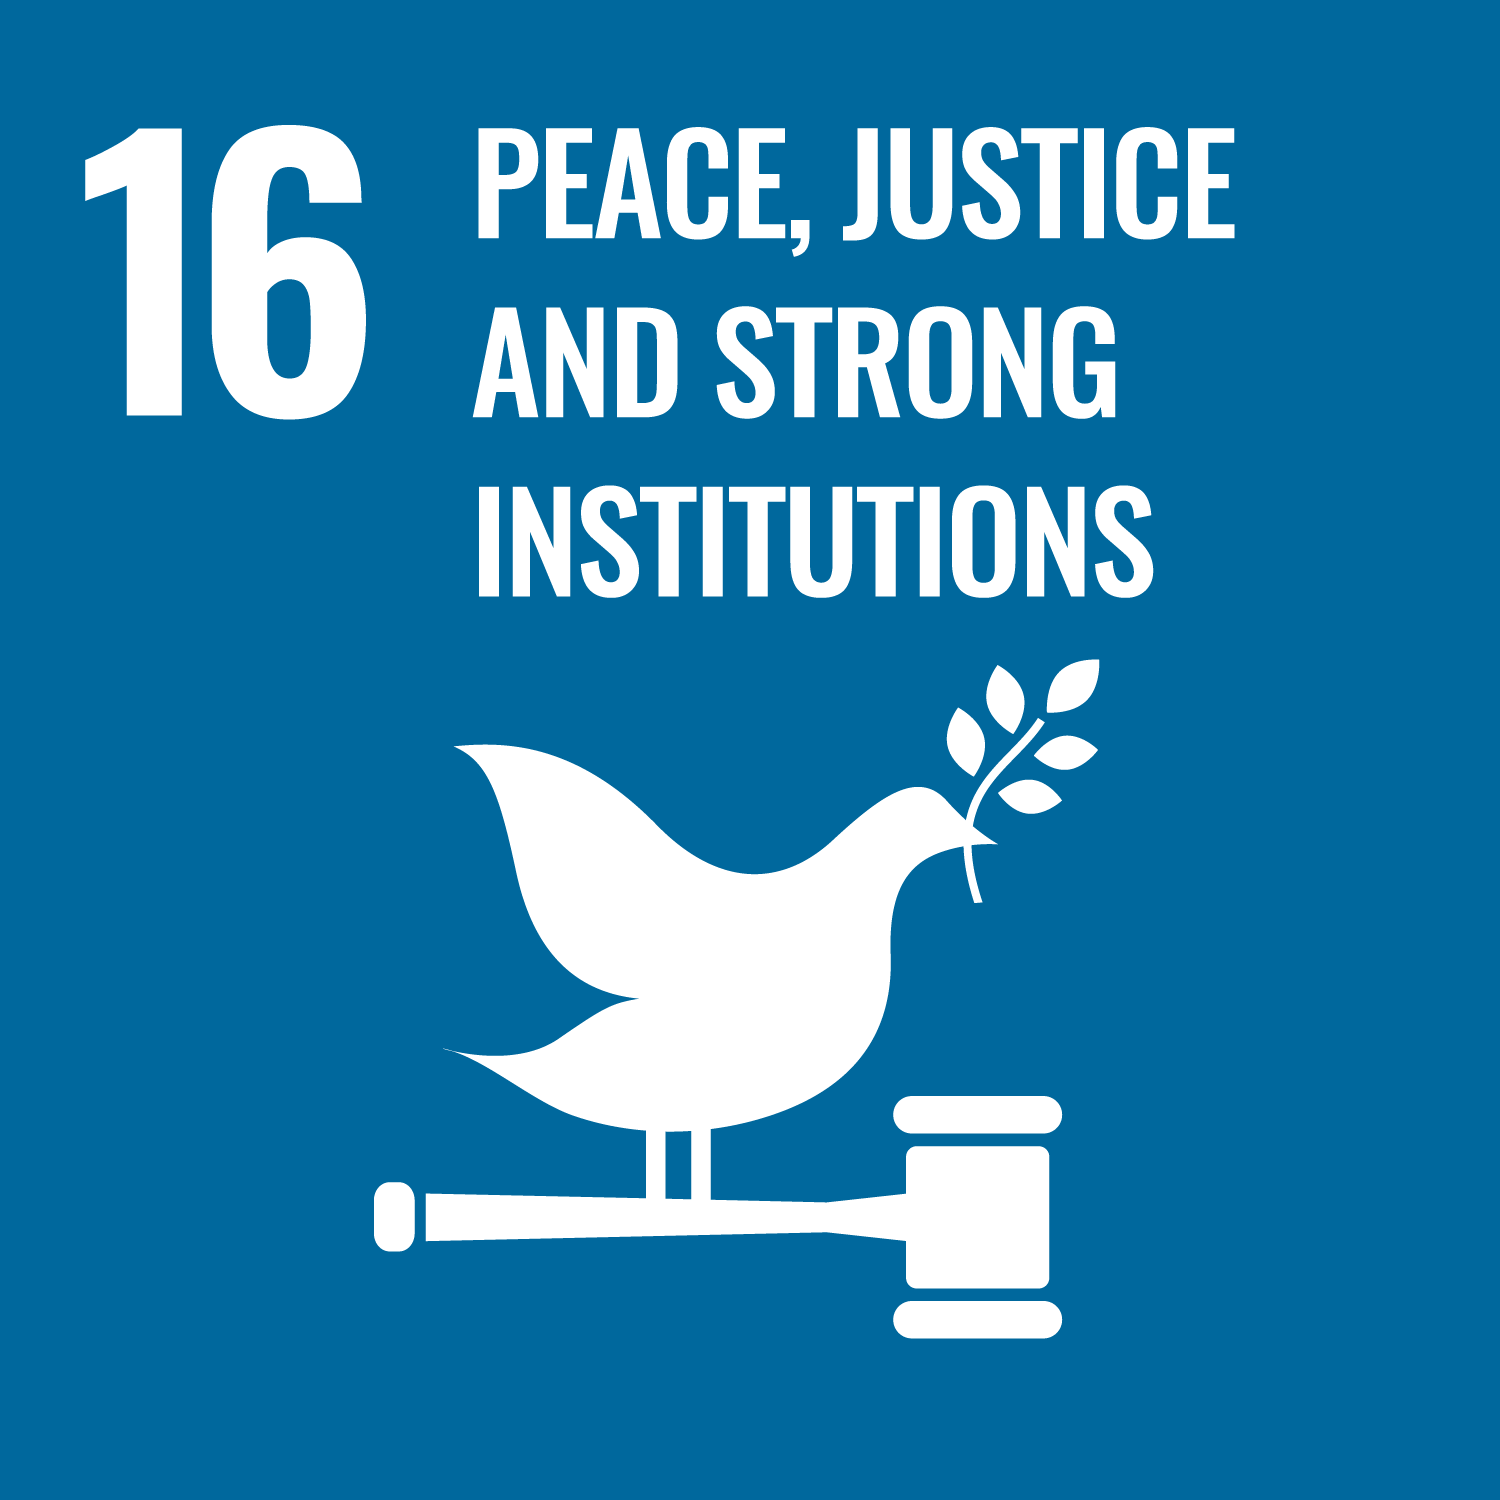 Sustainable Development Goal 16: Peace, justice and strong institutions